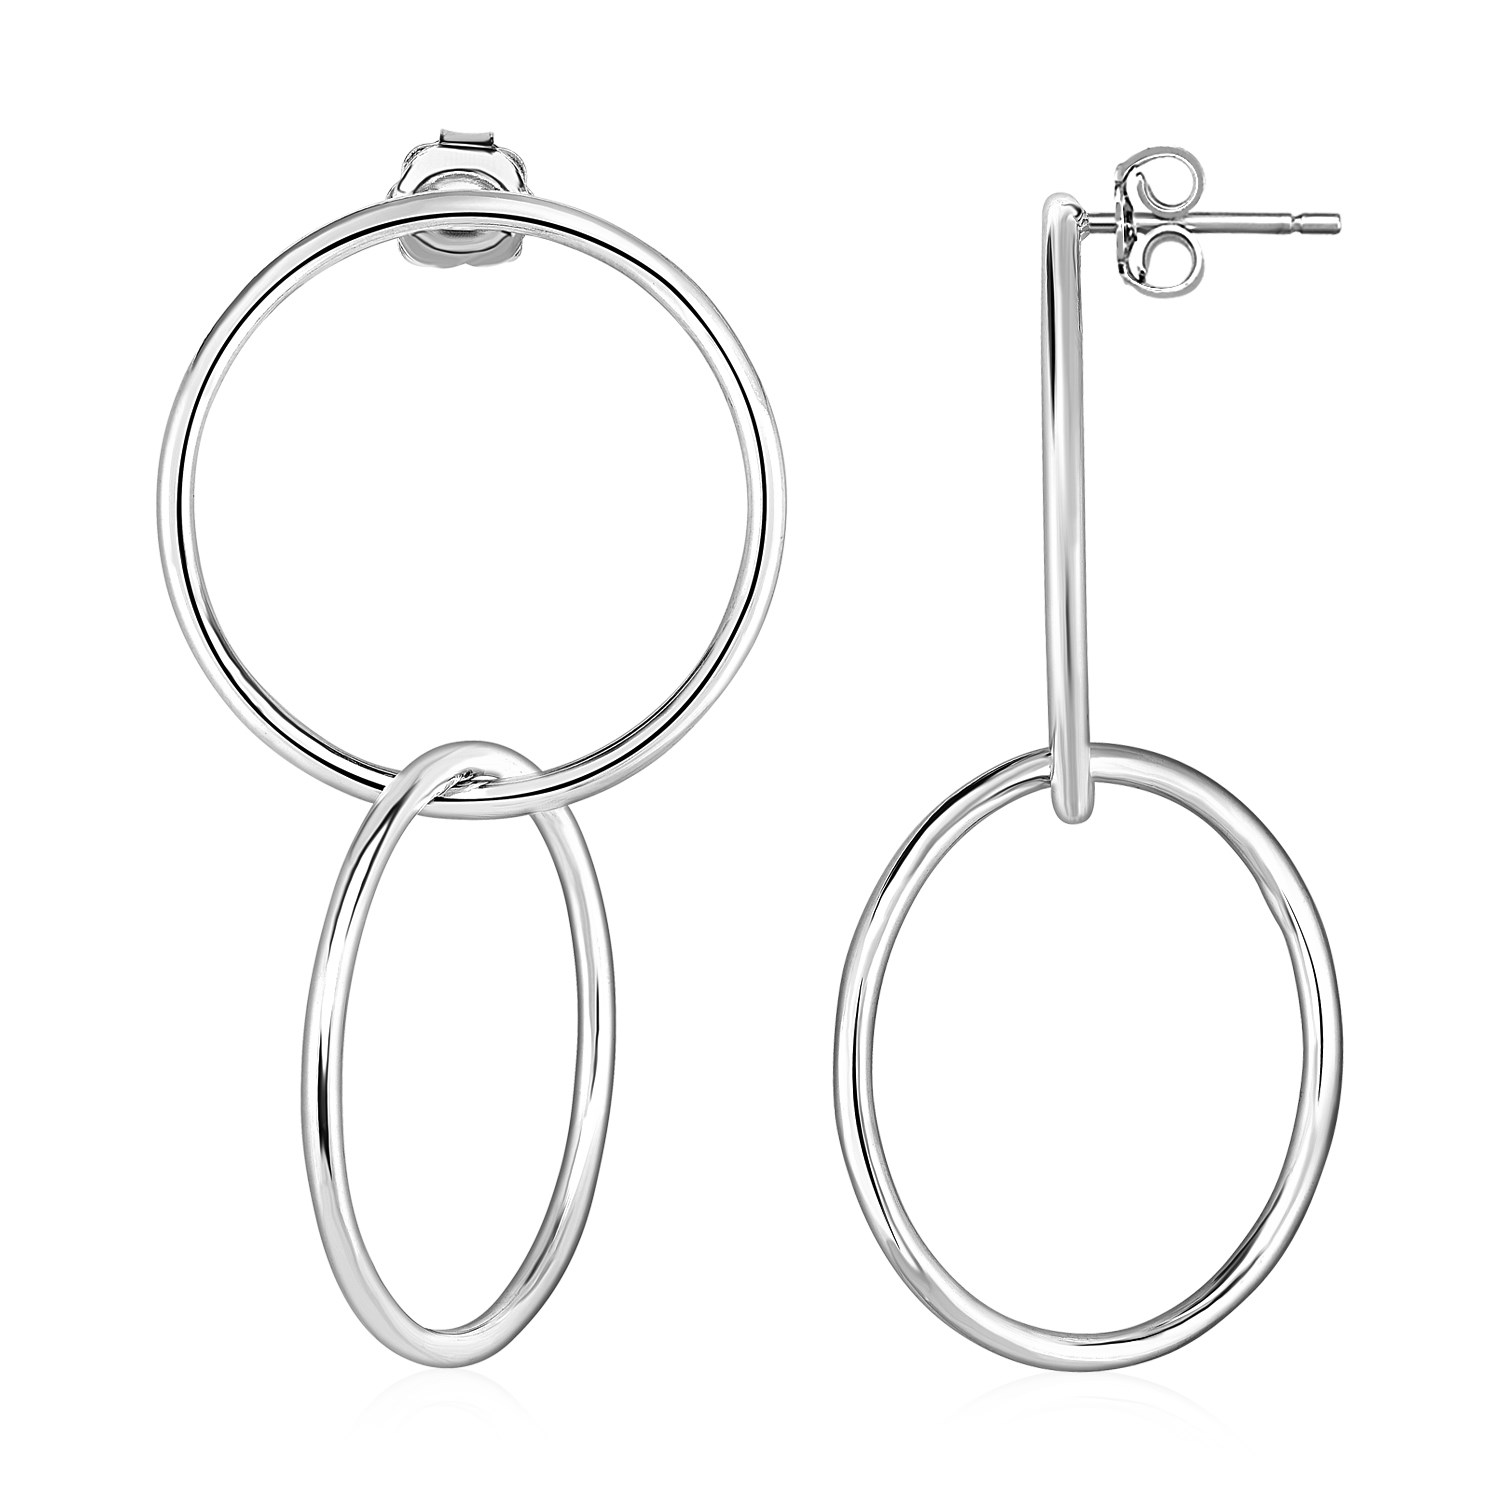 Interlocking Polished Ring Earrings in Sterling Silver - Richard Cannon ...